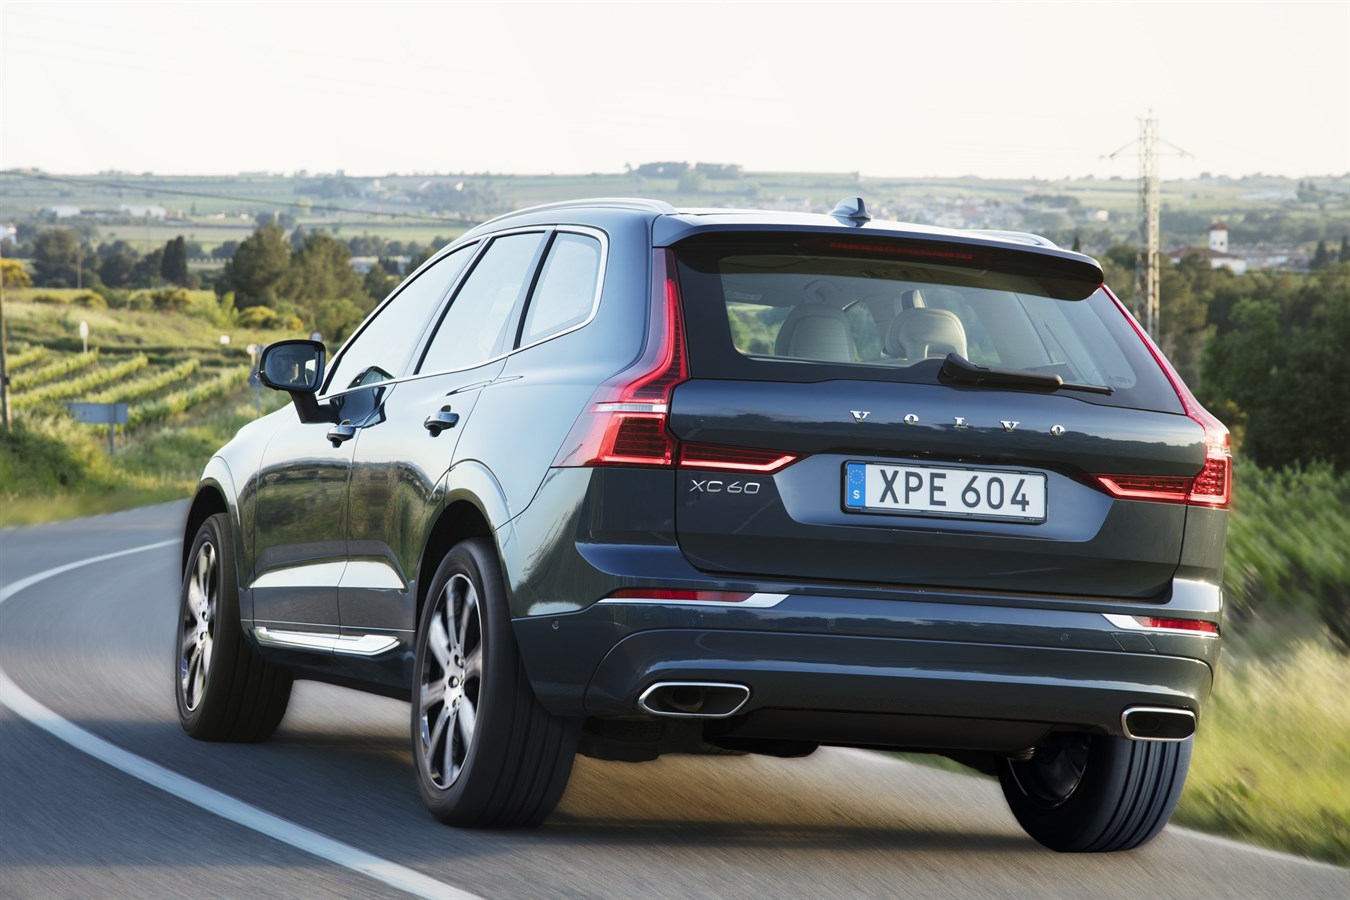 The new Volvo XC60 T6